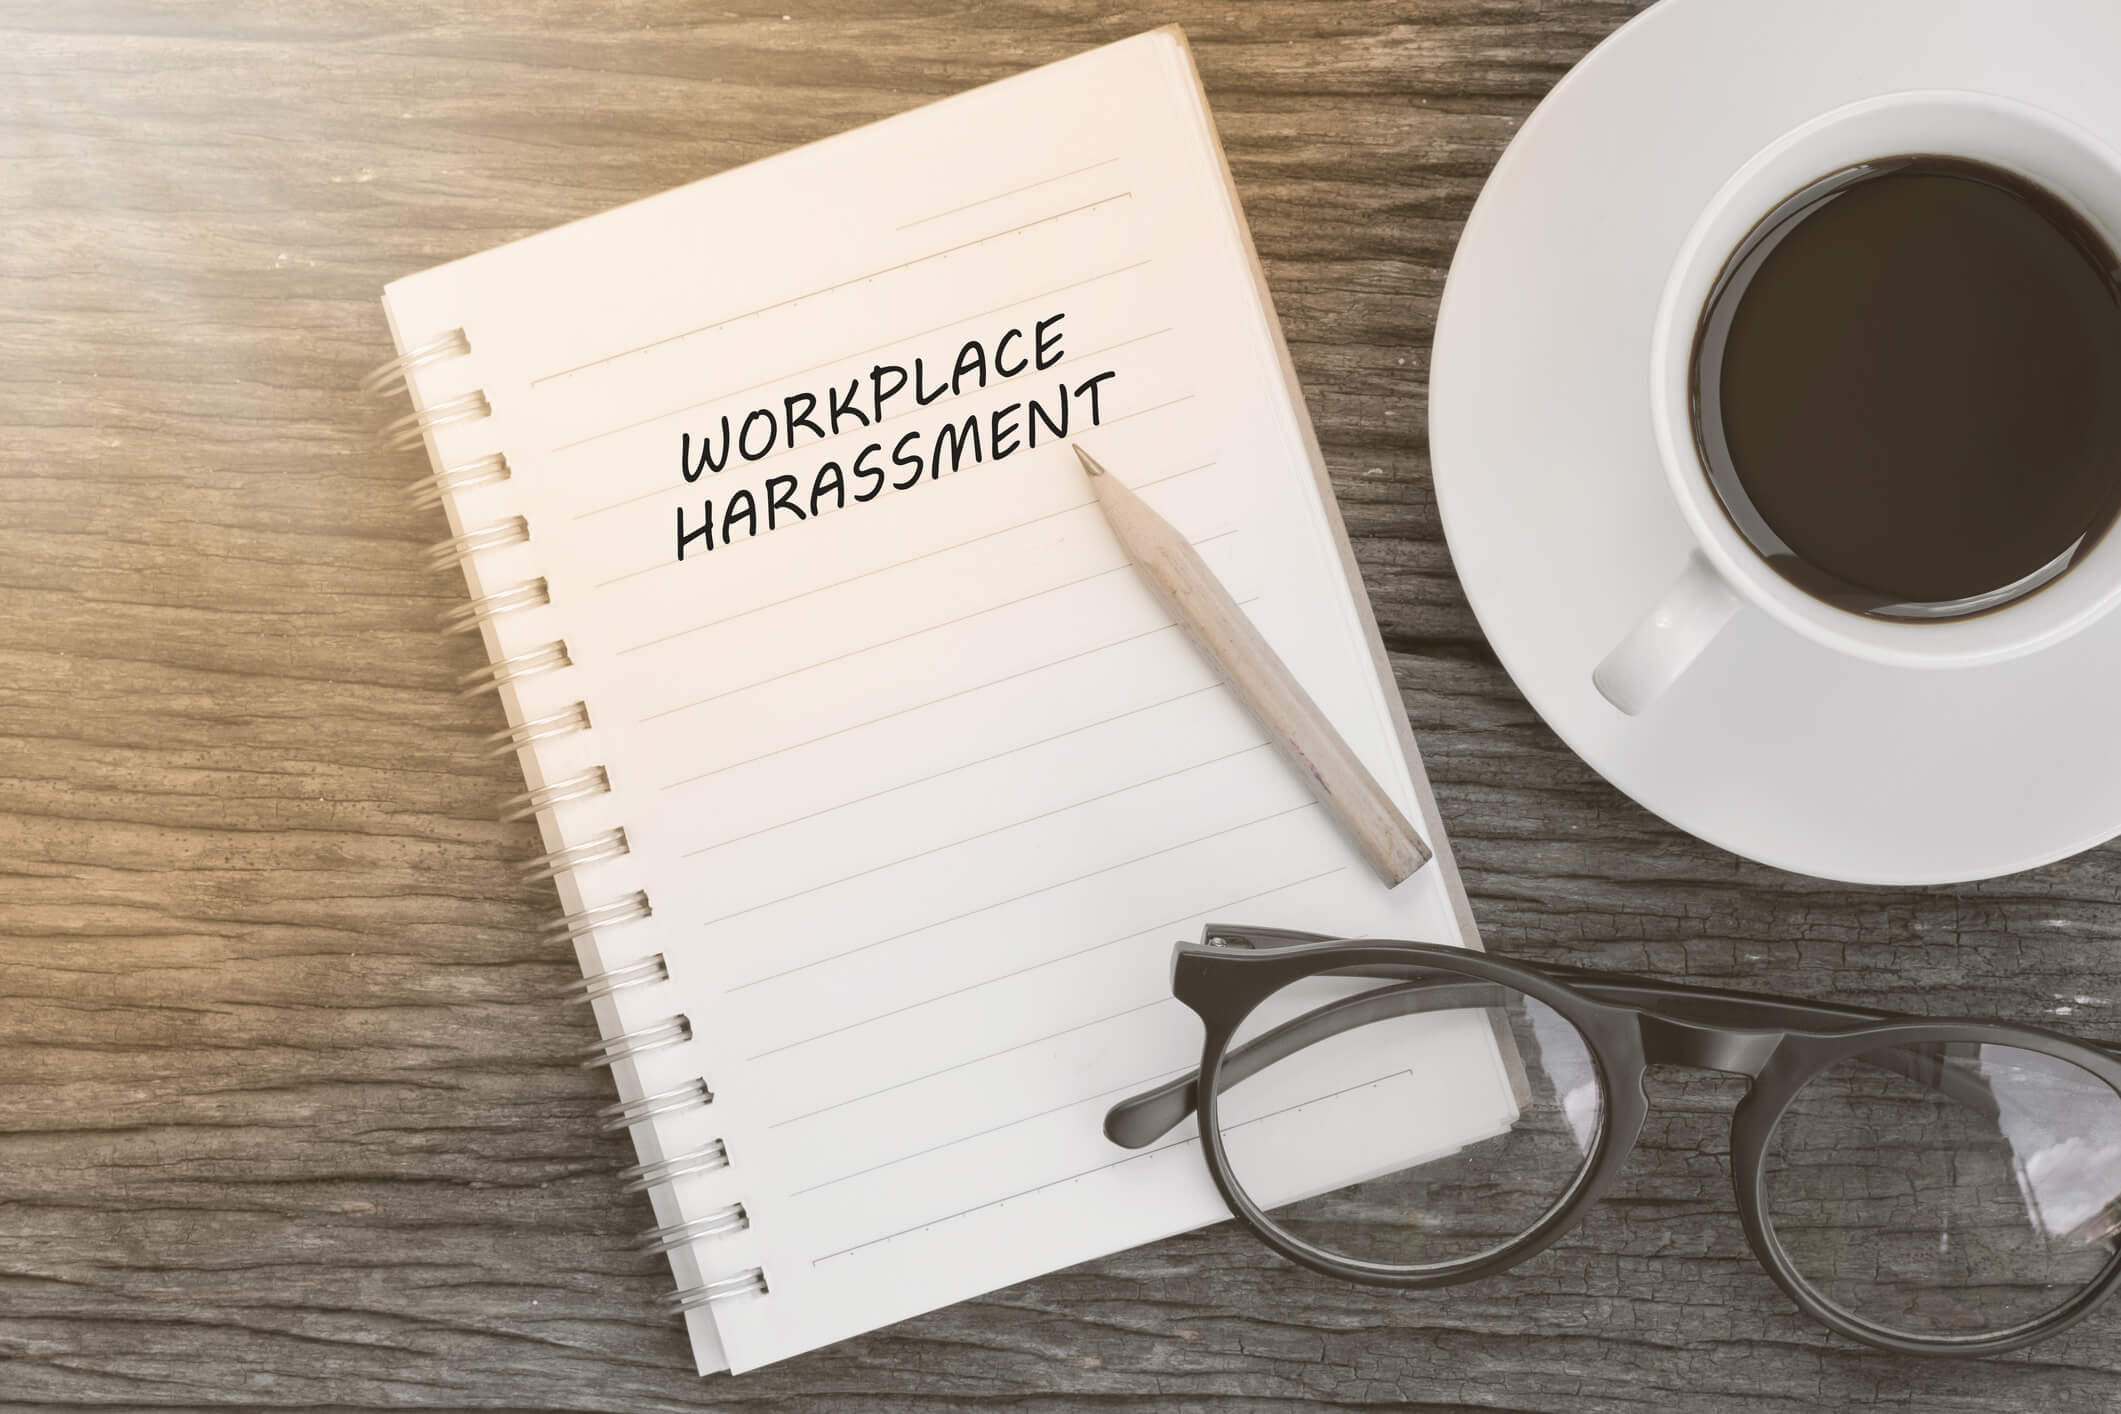 Workplace harassment notepad glasses coffee